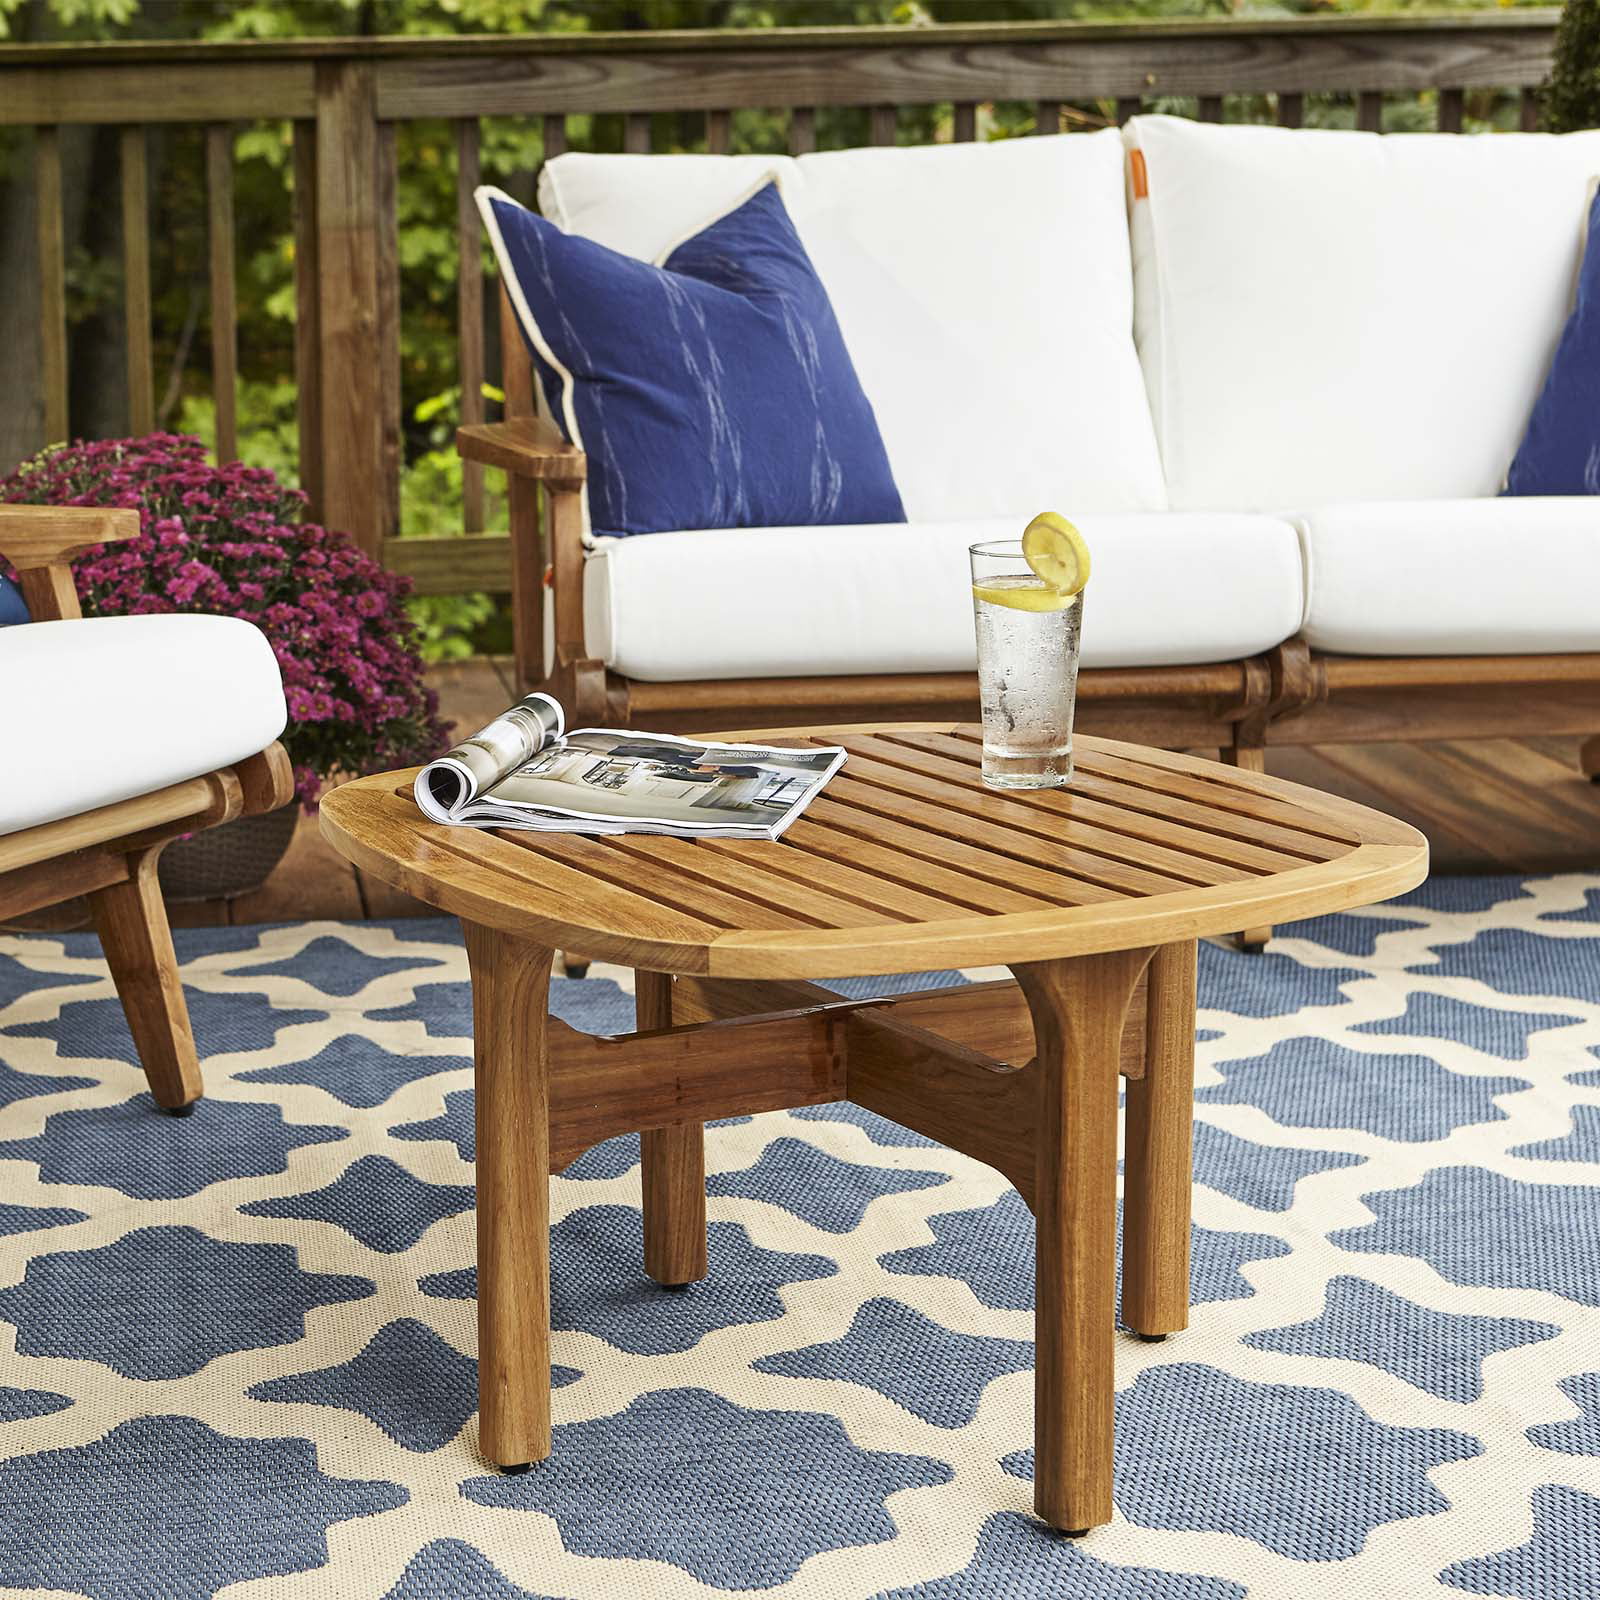 Transform Your Patio With Teak Patio Furniture: Top Picks For Every Style